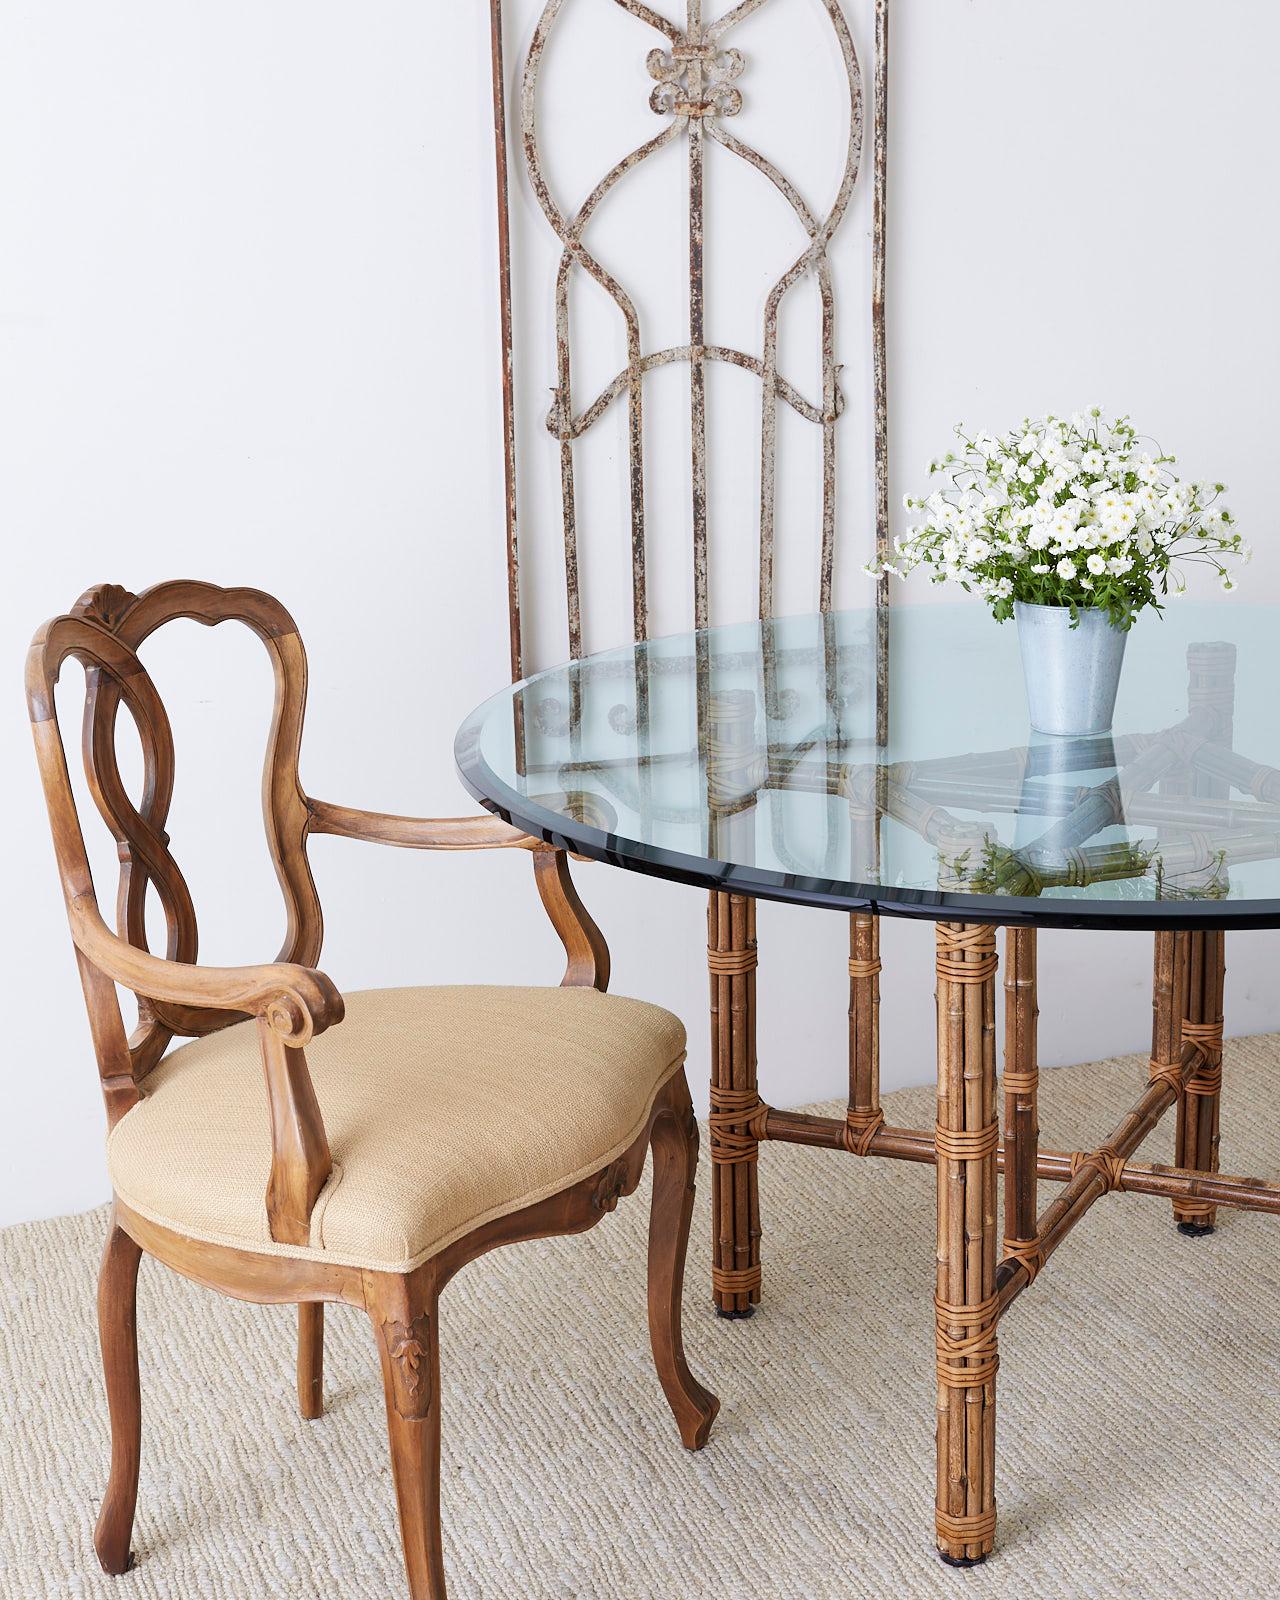 Genuine McGuire organic modern style dining table constructed from an iron frame hand wrapped with bamboo rattan poles. Reinforced with McGuire's signature leather rawhide strapping laces. The square base is topped with a thick round beveled glass